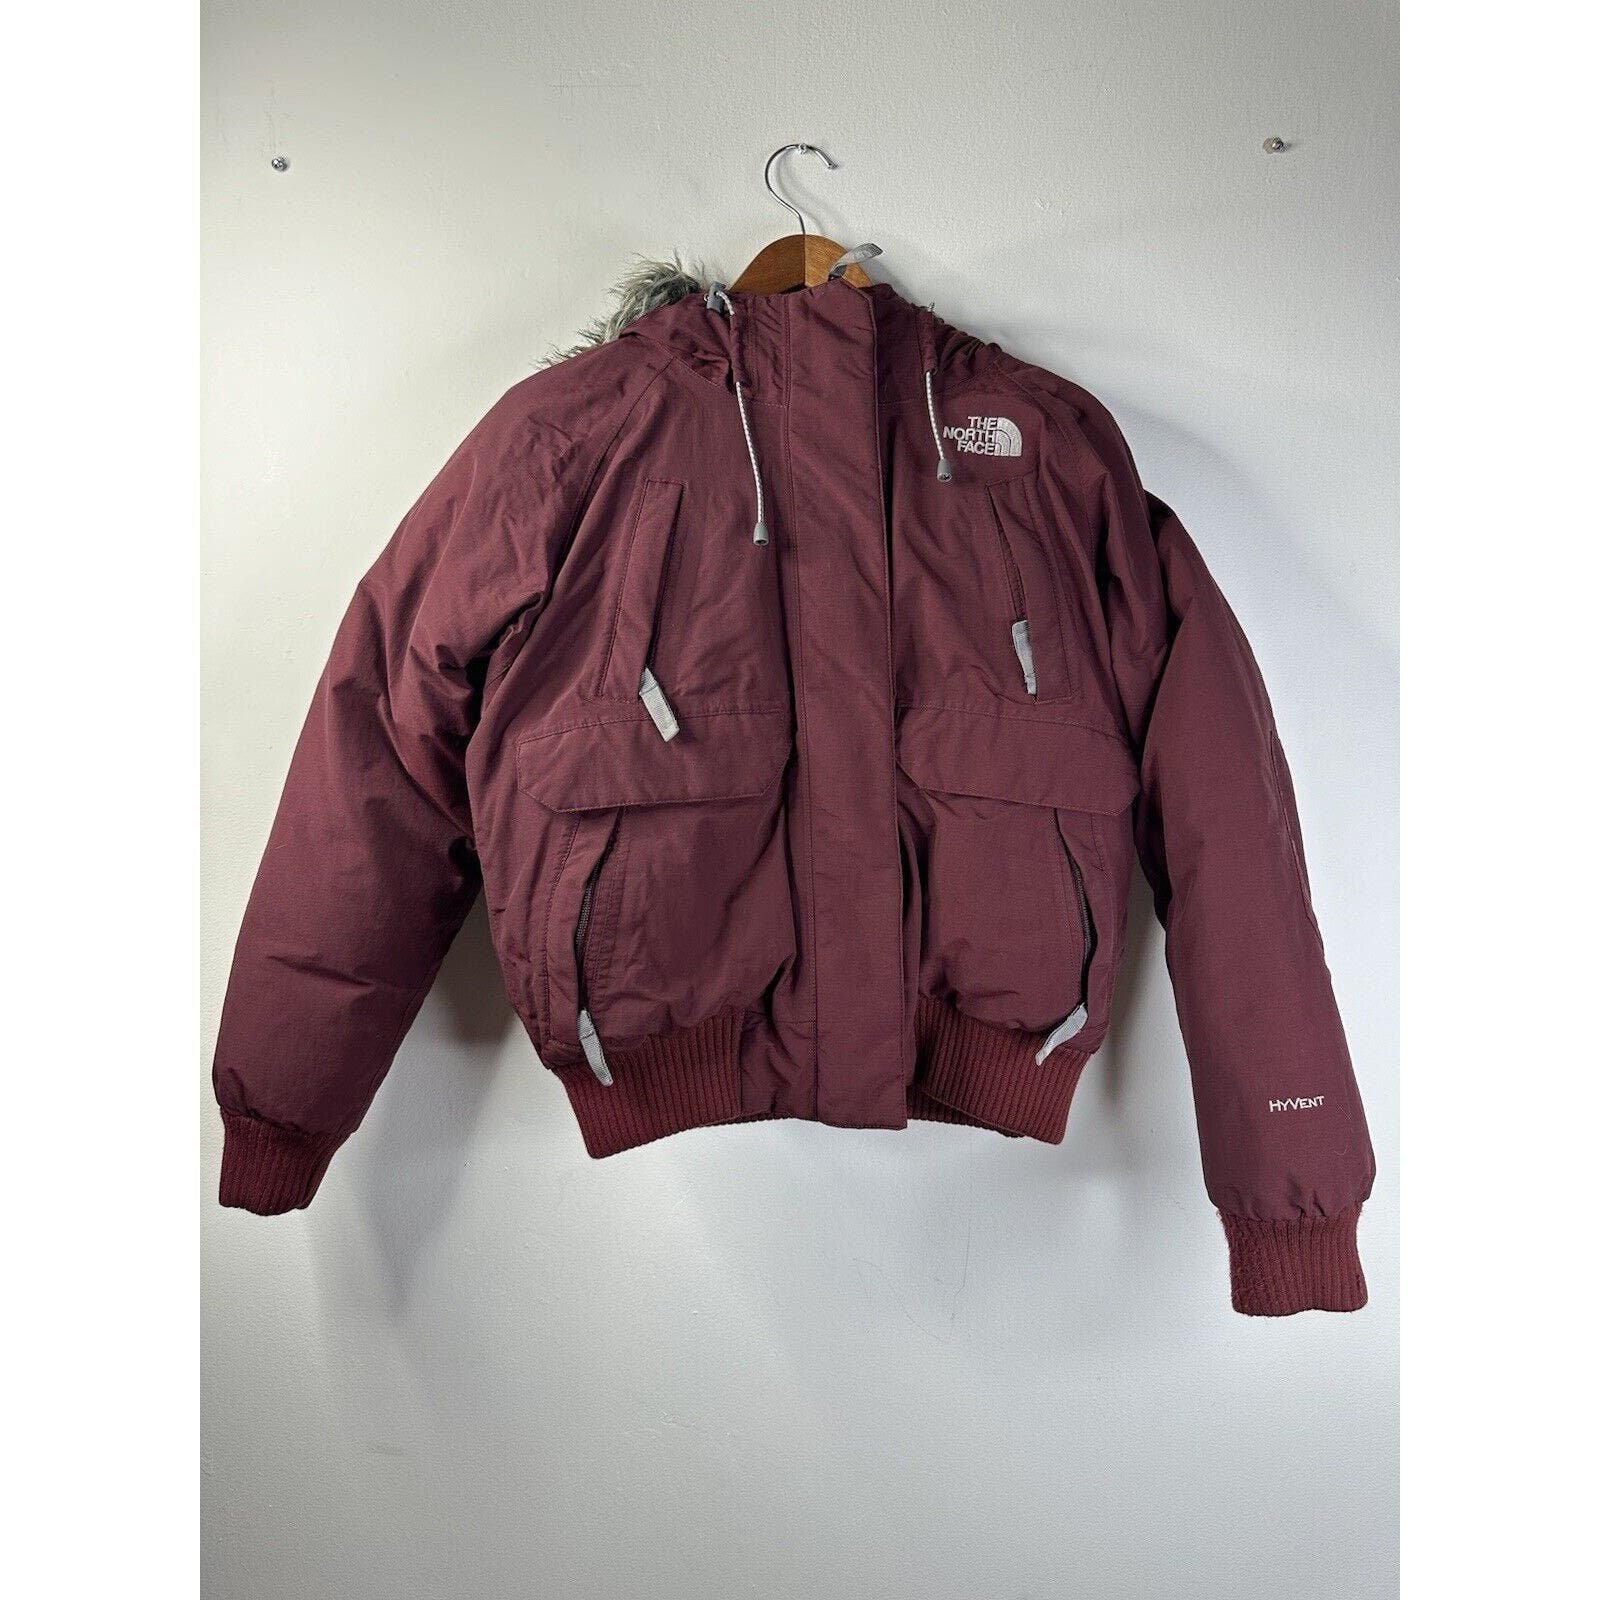 high discount THE NORTH FACE WOMEN´S DOWN FILL INSULATED JACKET Burgundy SIZE M HyVent PFDO8oMGS Great